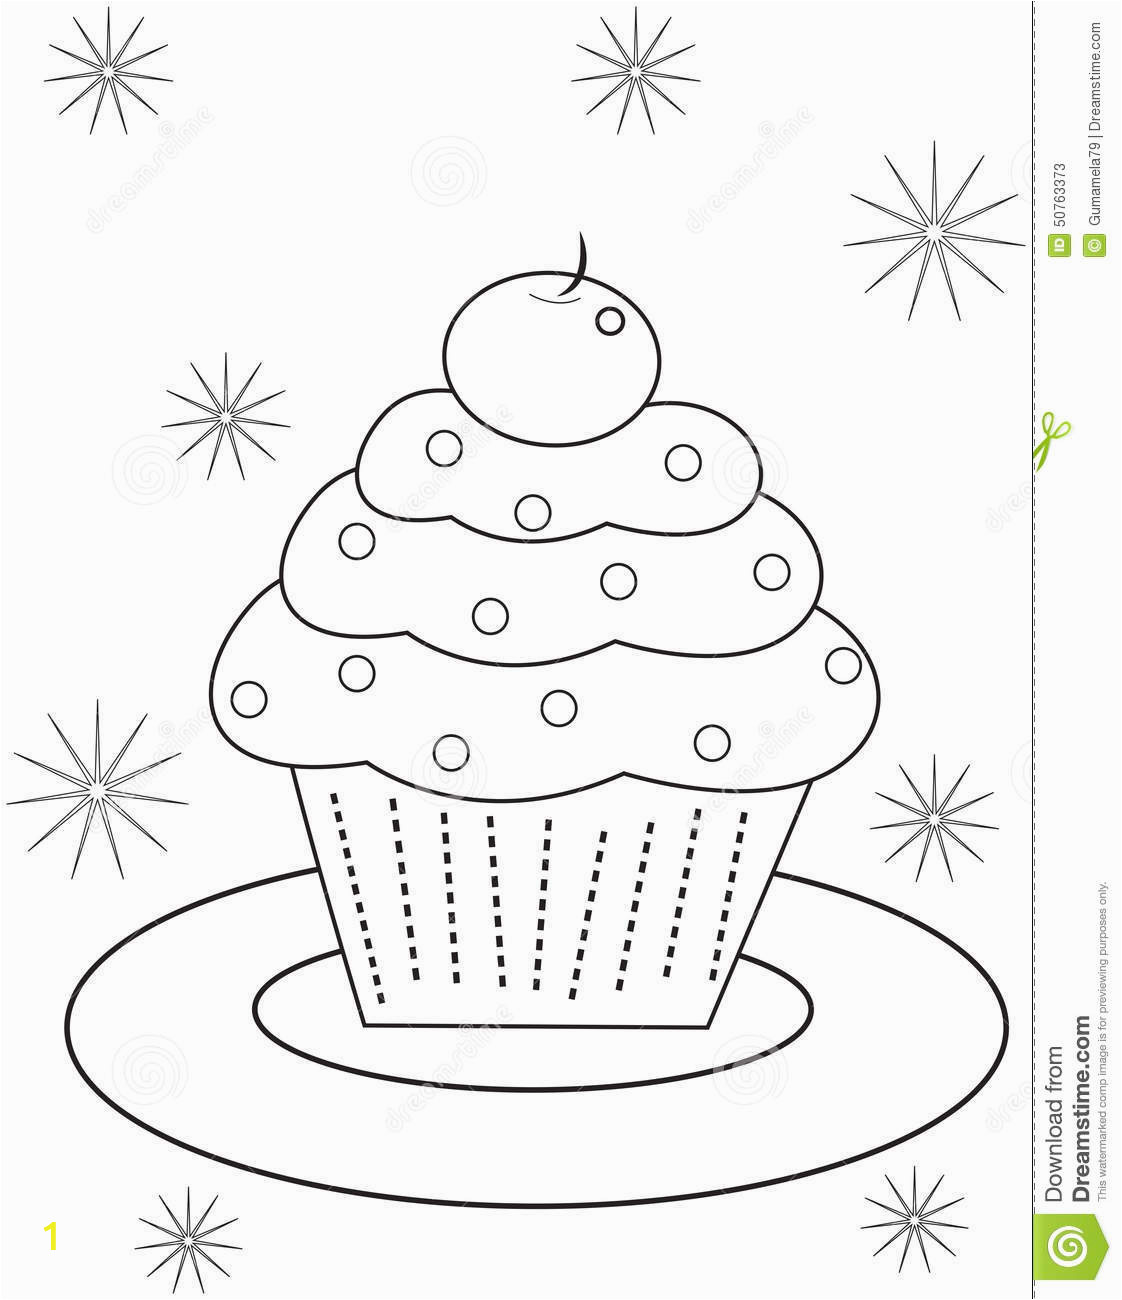 cupcake coloring page useful as book kids